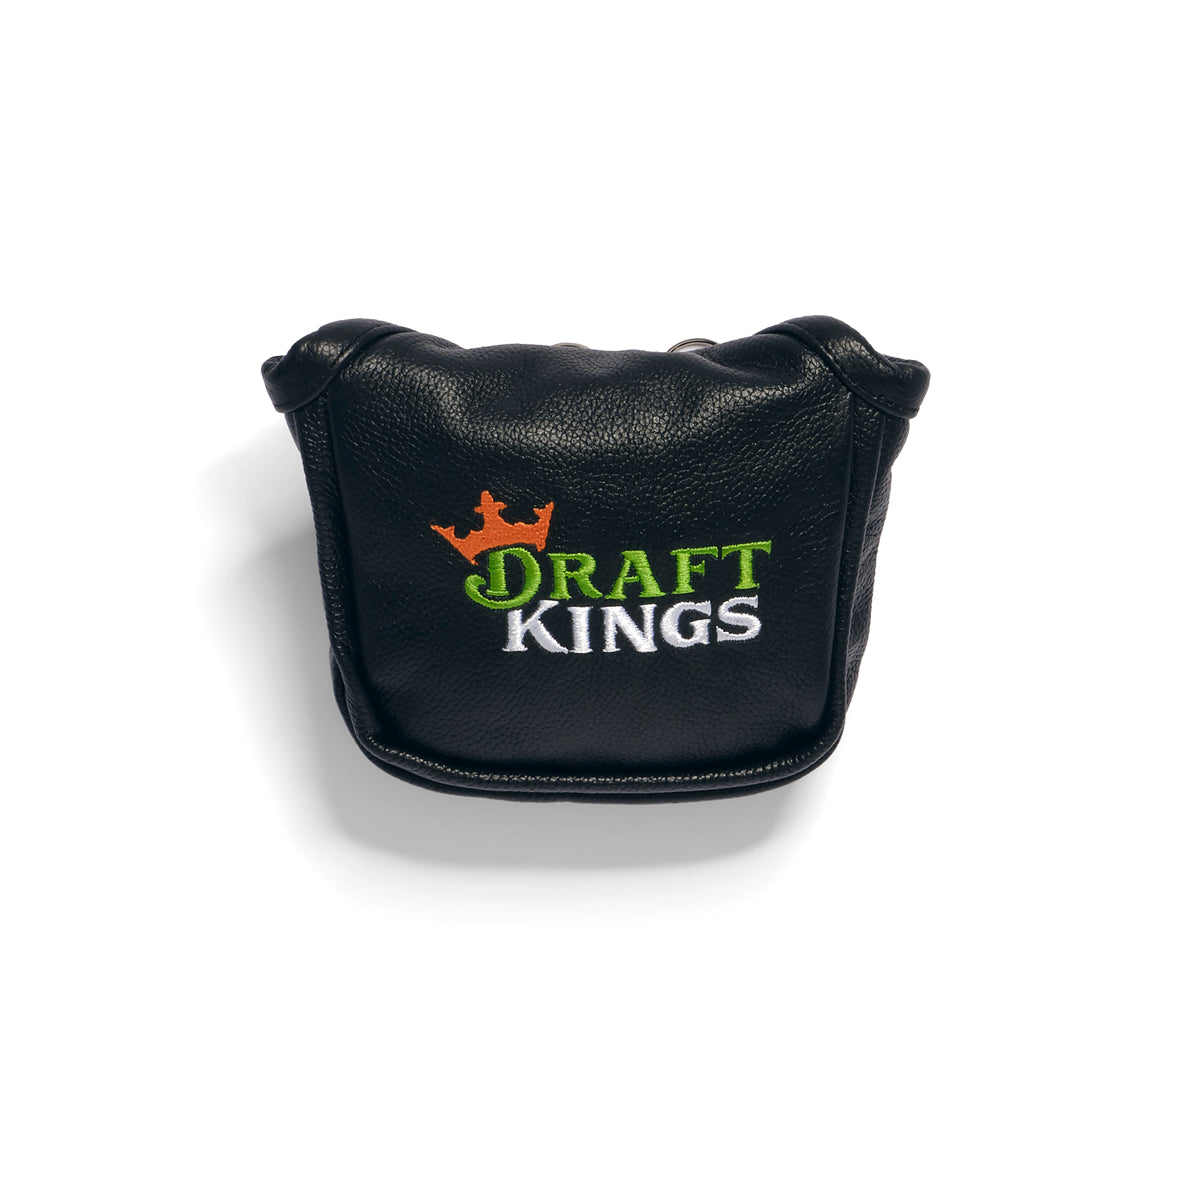 DraftKings Mallet Putter Head Cover